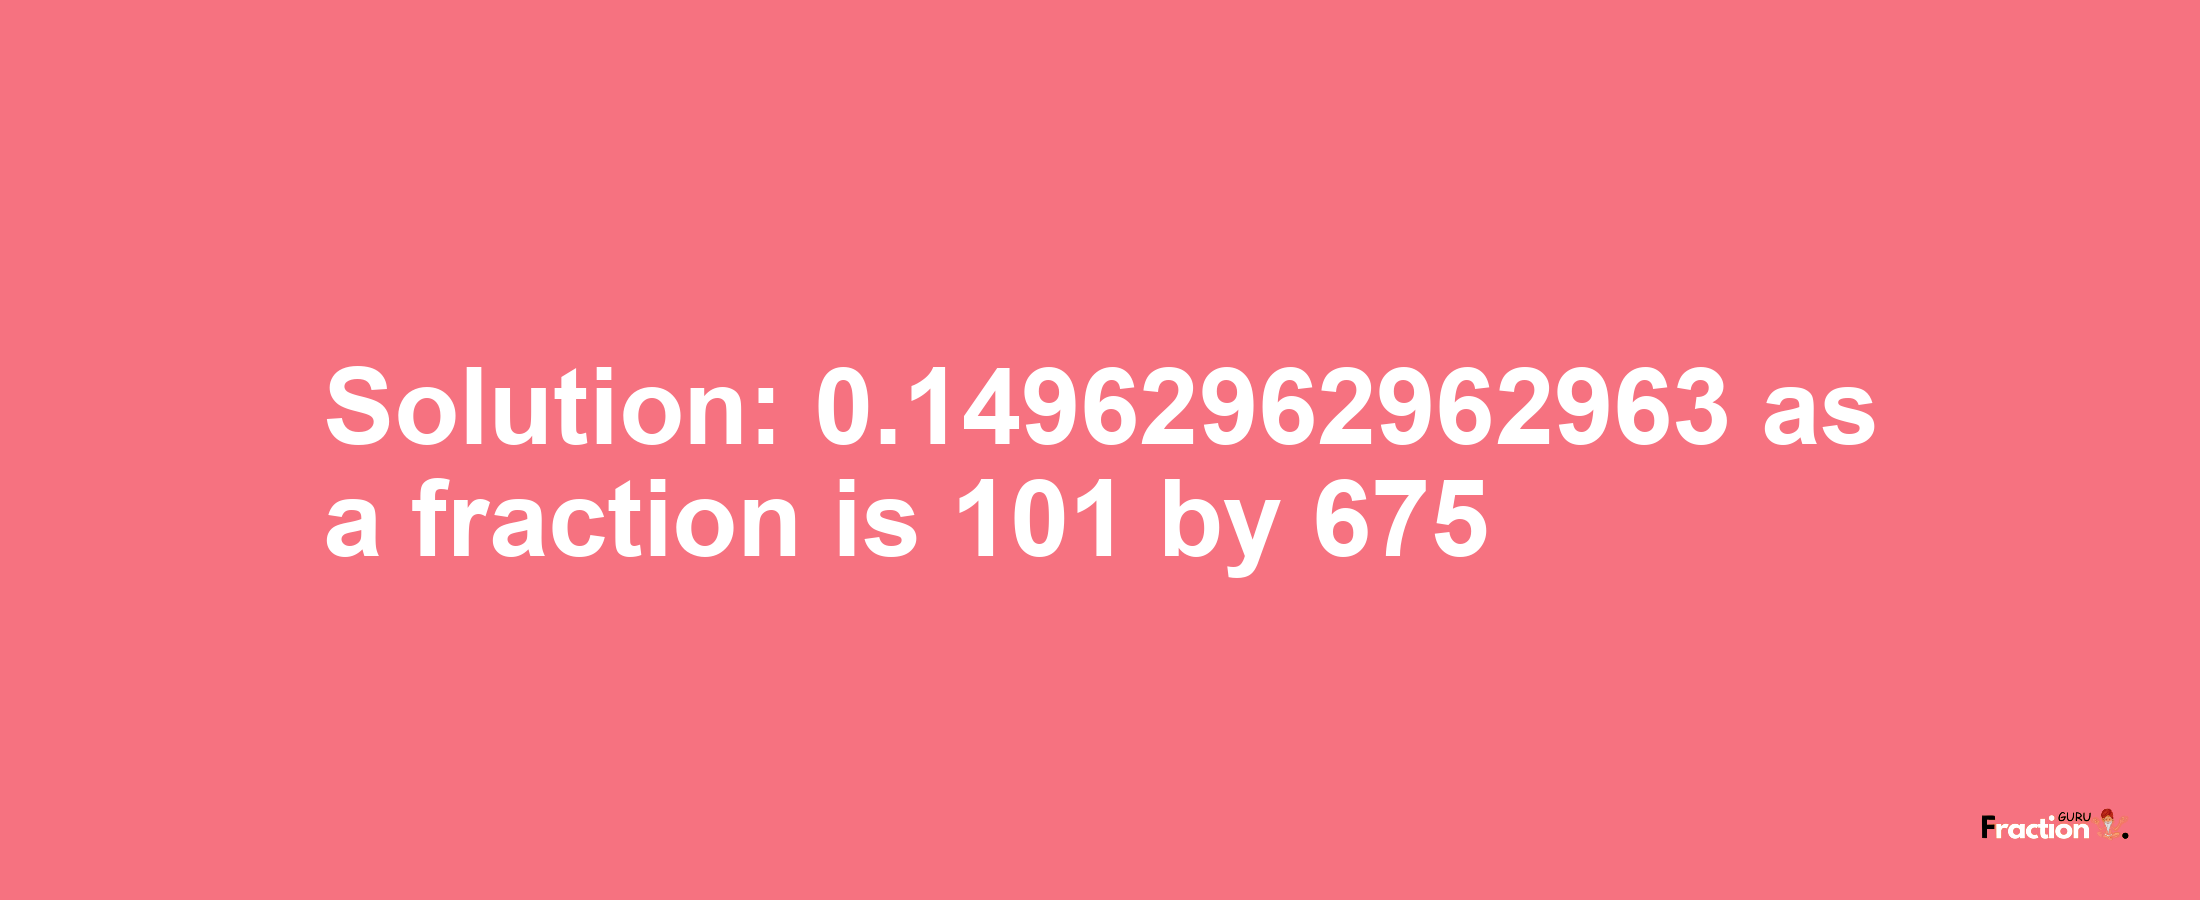 Solution:0.14962962962963 as a fraction is 101/675